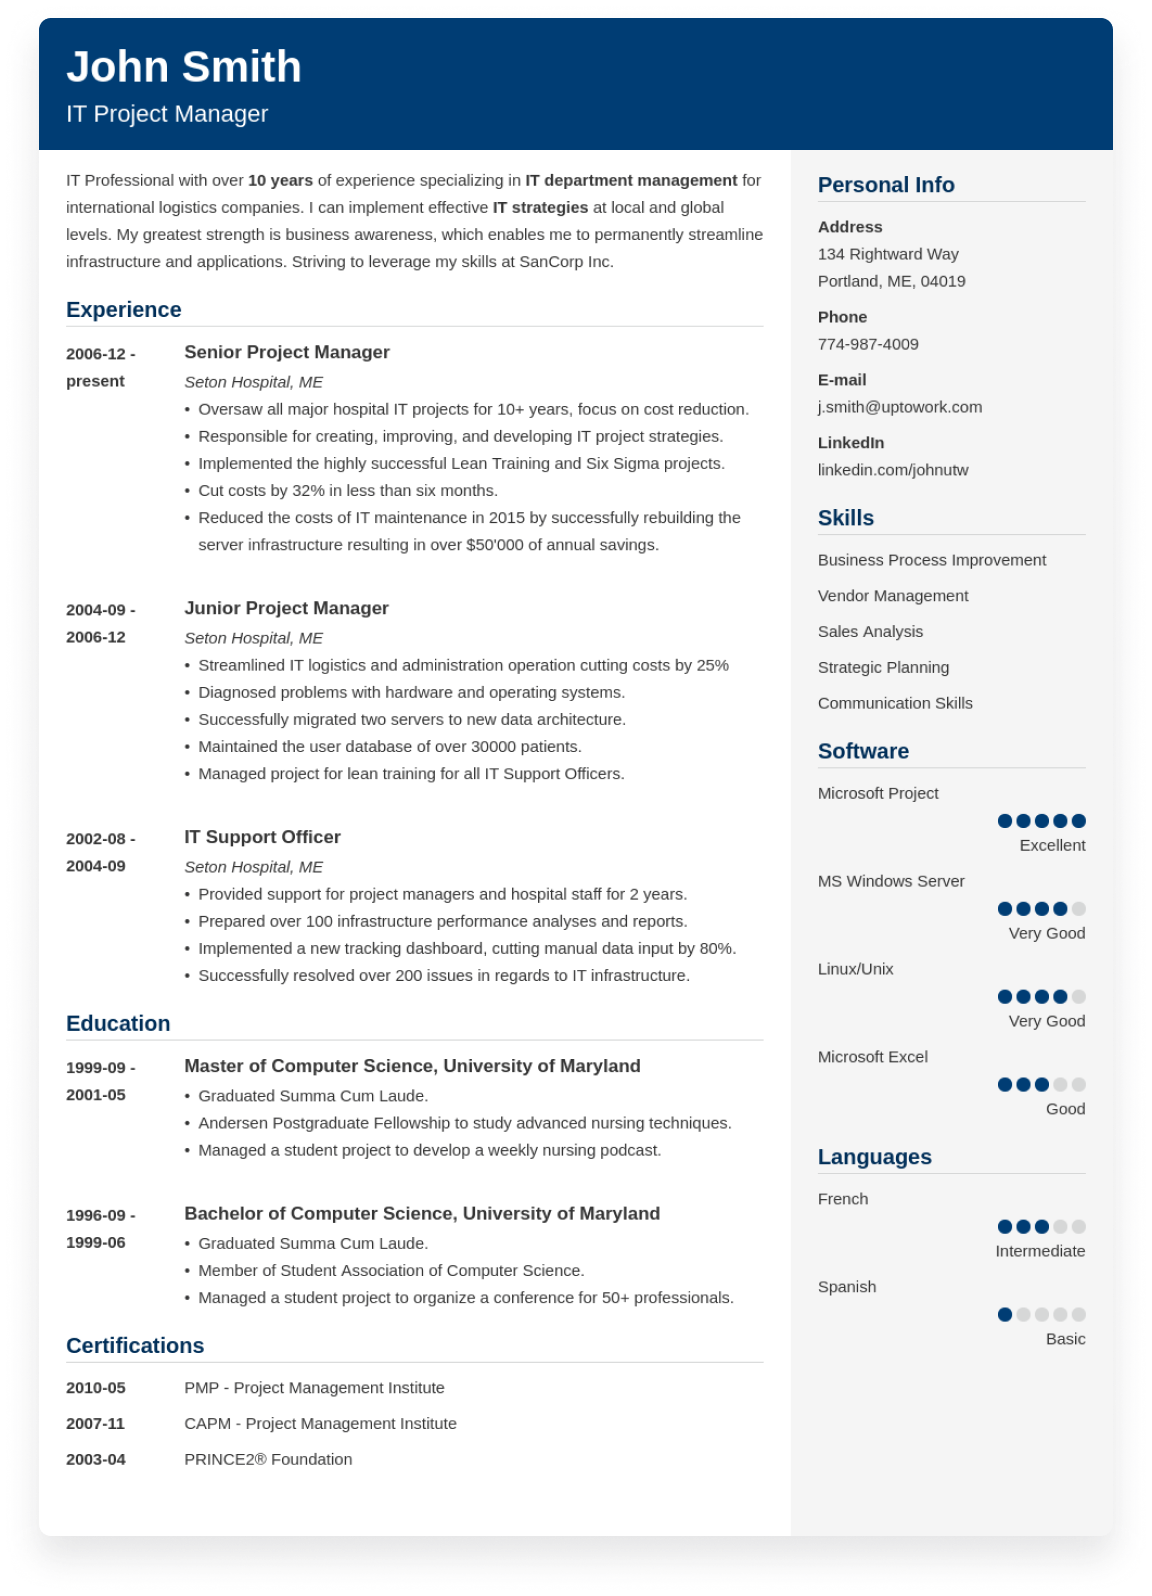 Sample Resume made with our Resume Builder